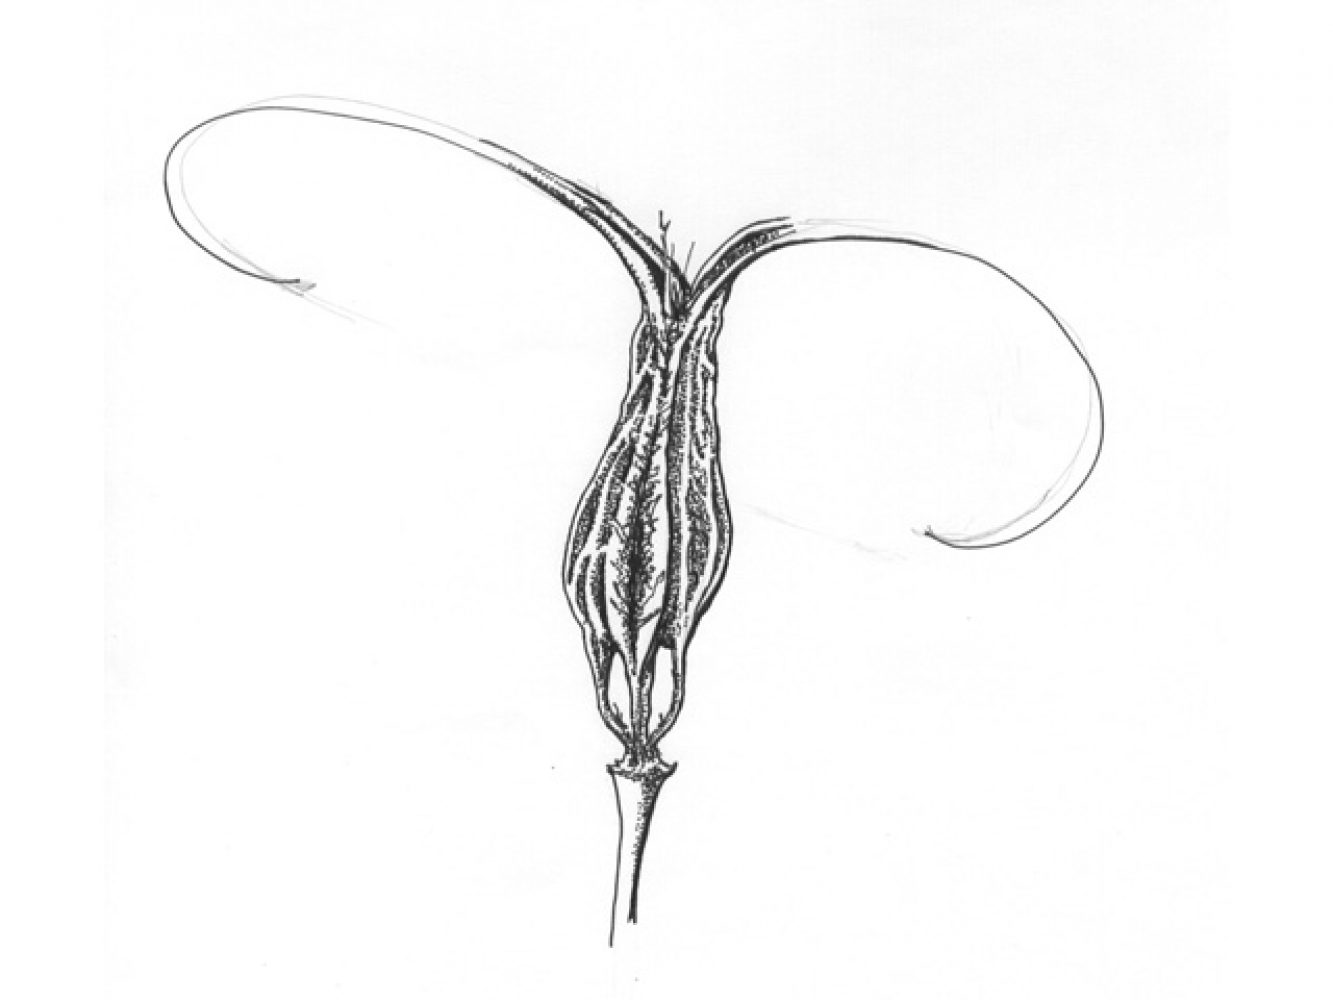 Proboscidea louisianica, 2012
Sweeney, Collene
Pen and ink on Bristol board rendering of a mature diclesium 
Botanical Illustration Collection